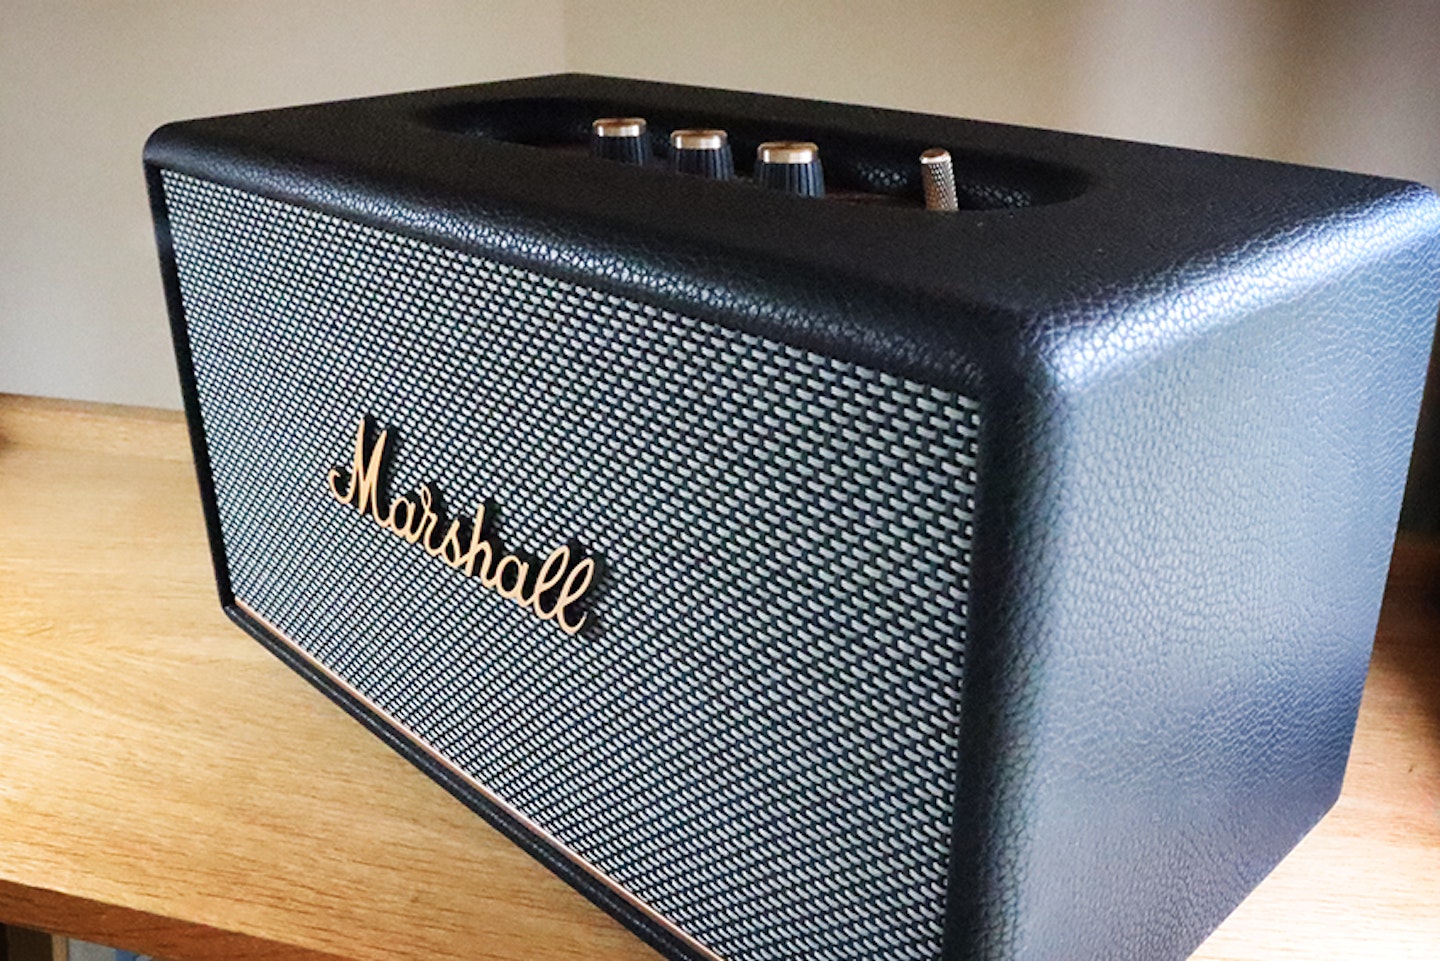 Marshall Stanmore III review: Wildly impressive but imperfect